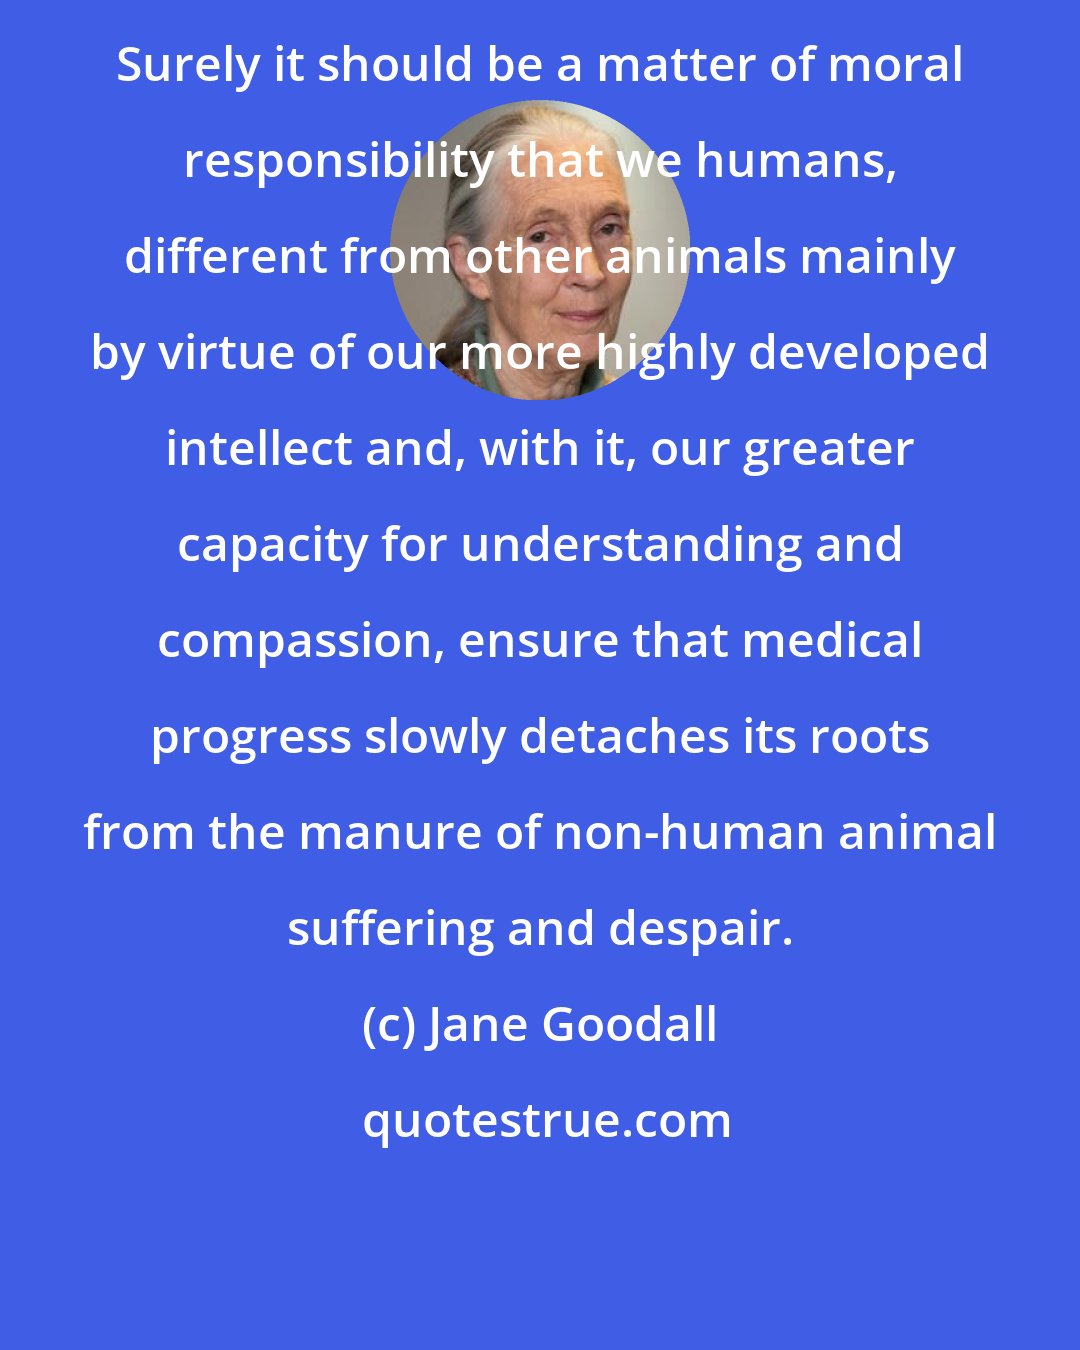 Jane Goodall: Surely it should be a matter of moral responsibility that we humans, different from other animals mainly by virtue of our more highly developed intellect and, with it, our greater capacity for understanding and compassion, ensure that medical progress slowly detaches its roots from the manure of non-human animal suffering and despair.